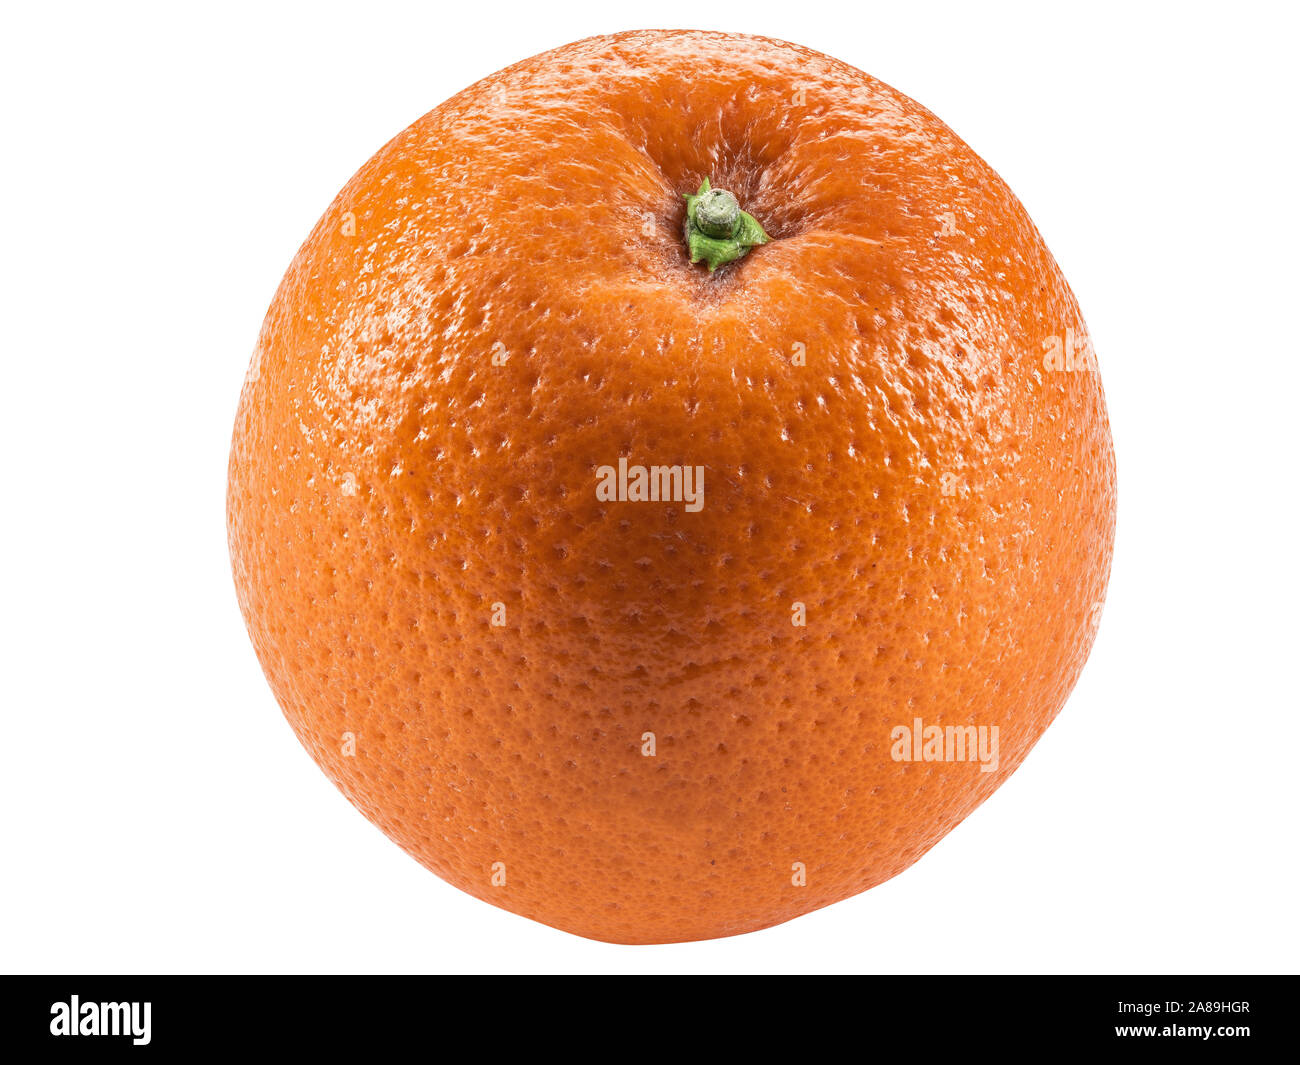 Smooth Skinned Orange Isolated On White Background With Copy Space For